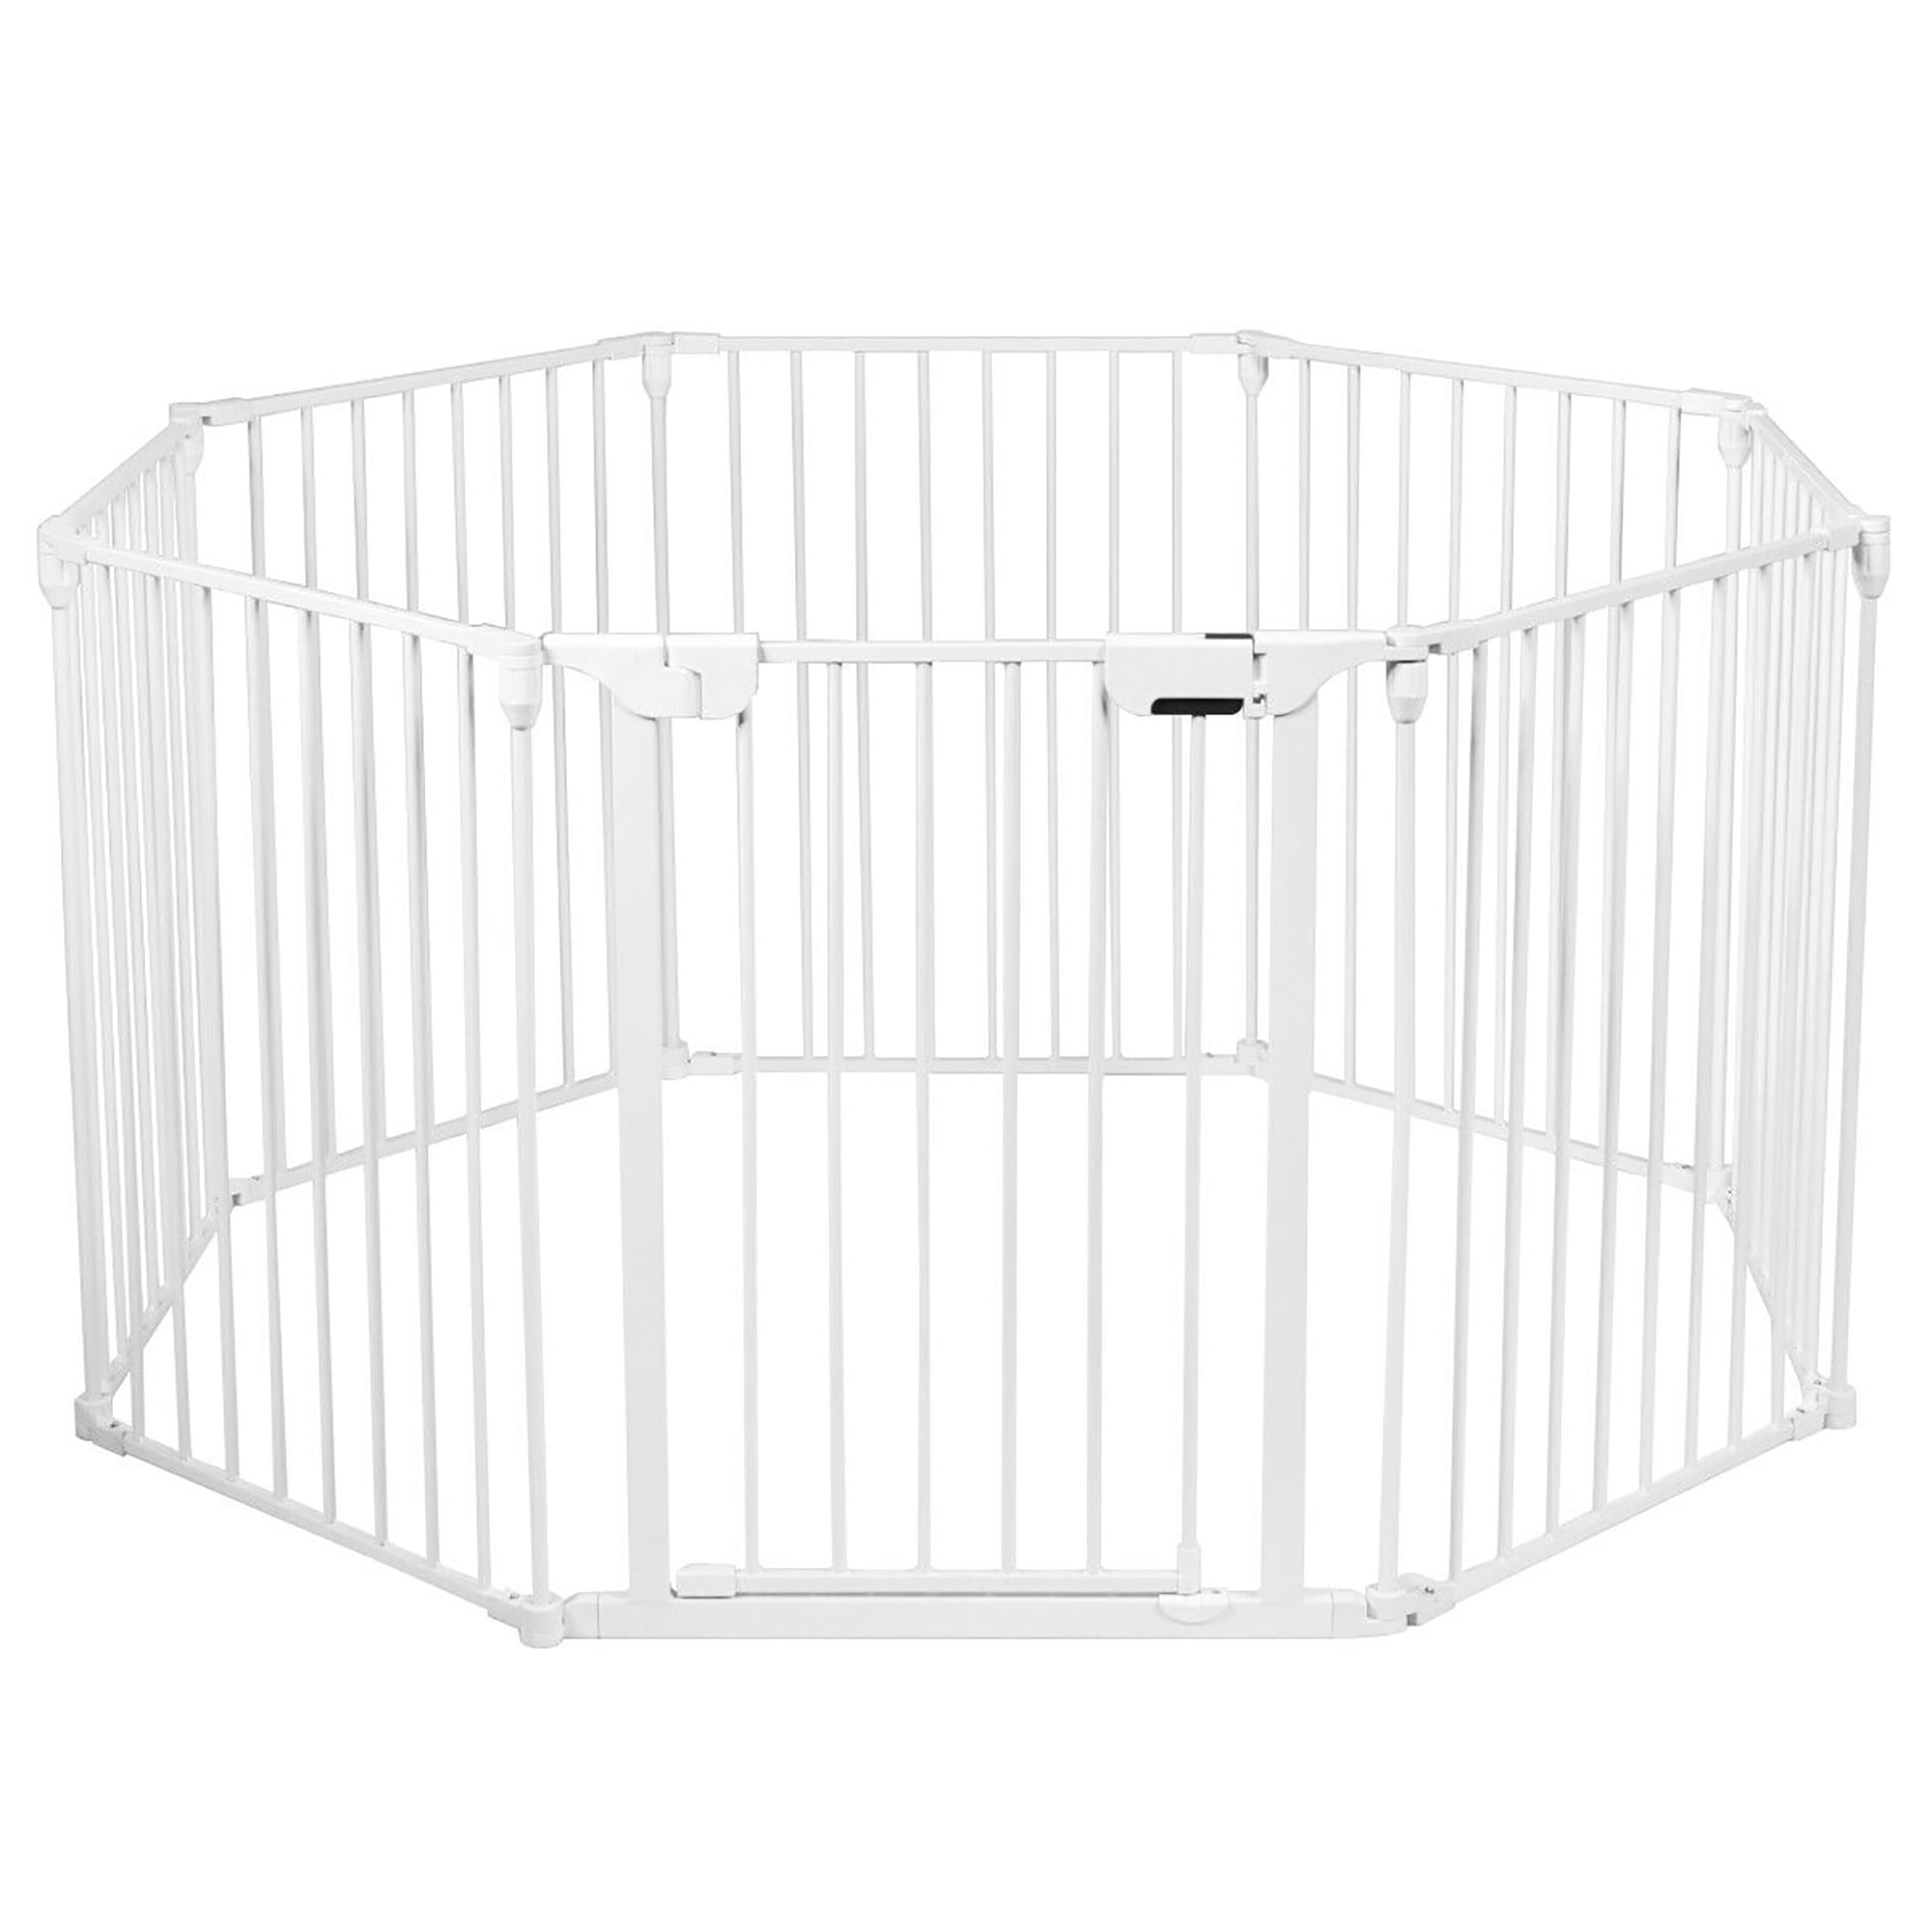 6 or 8 New Homey Pet Baby Dog Safety Playard Playpen Fence Gate 30" 35" 40" 